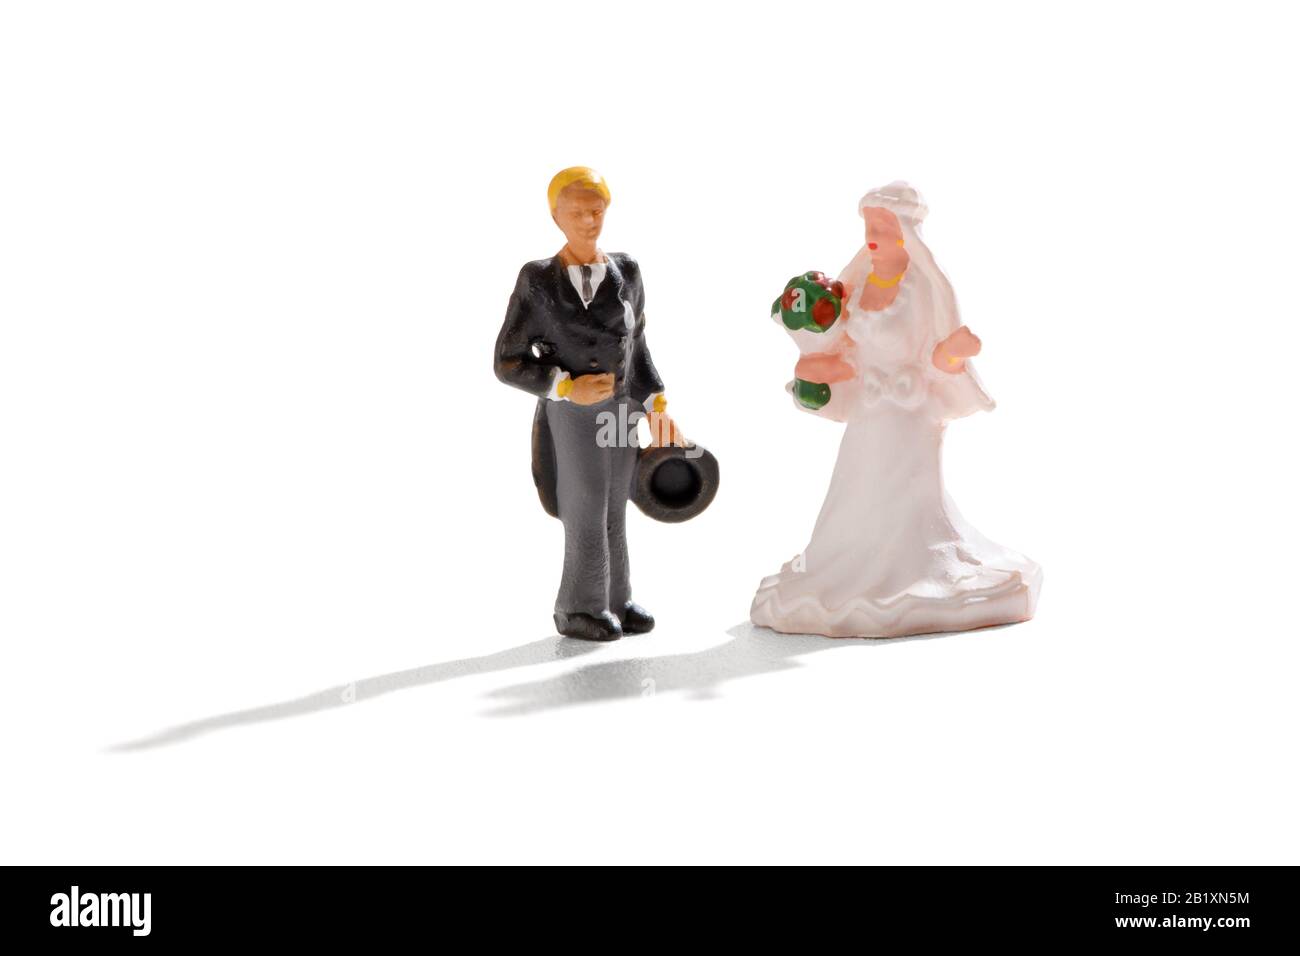 Miniature wedding with a bride and groom in top hat and tails and a white gown standing together on white Stock Photo